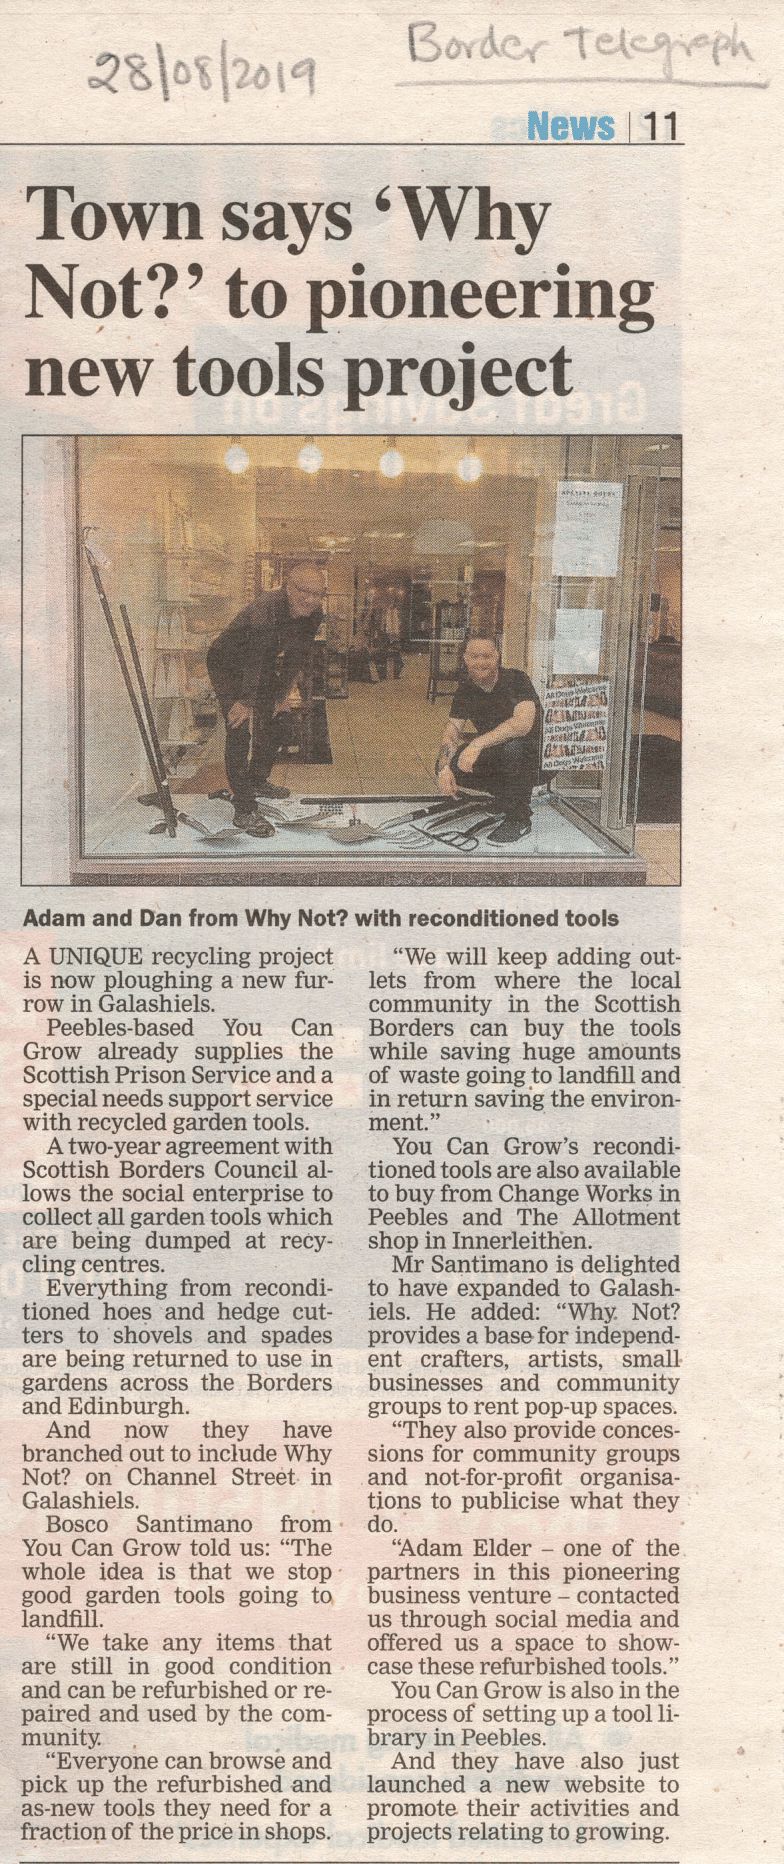 Press Clipping: Town says Why Not to pioneering new tools project